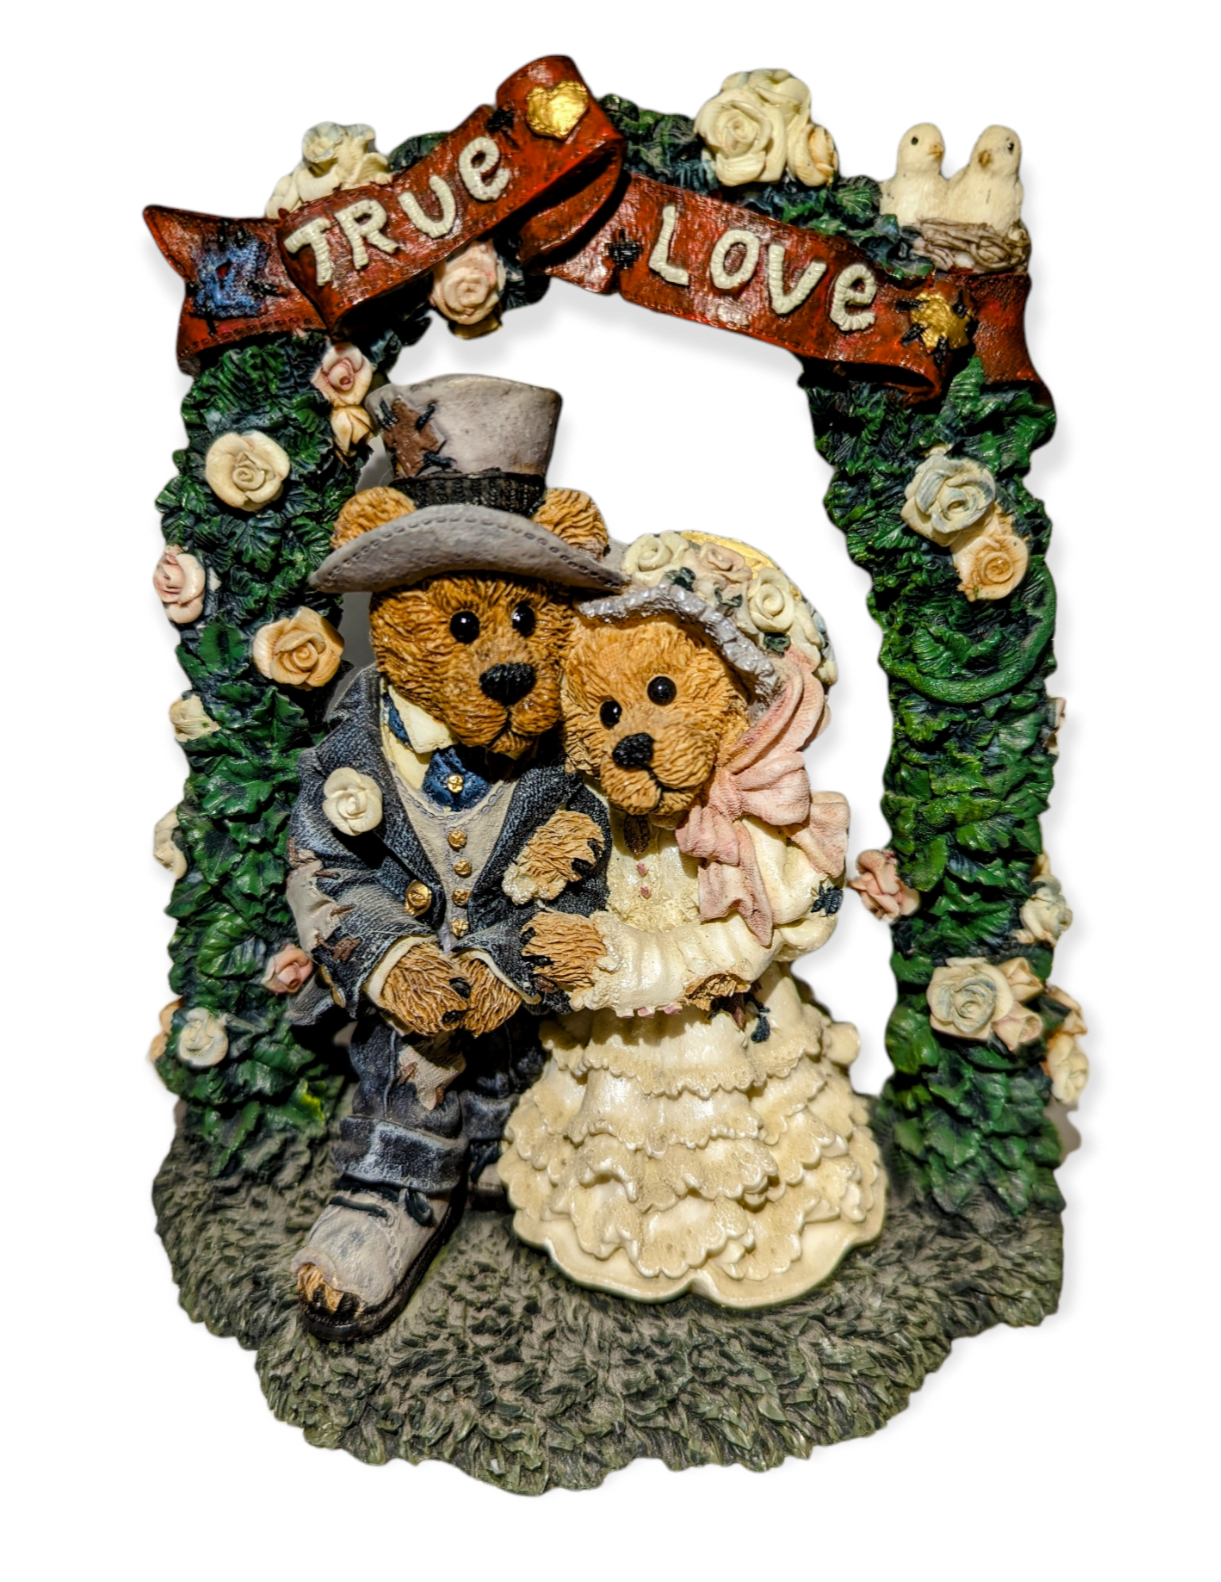 Boyds Bears & Friends - "Grenville and Beatrice…True Love"